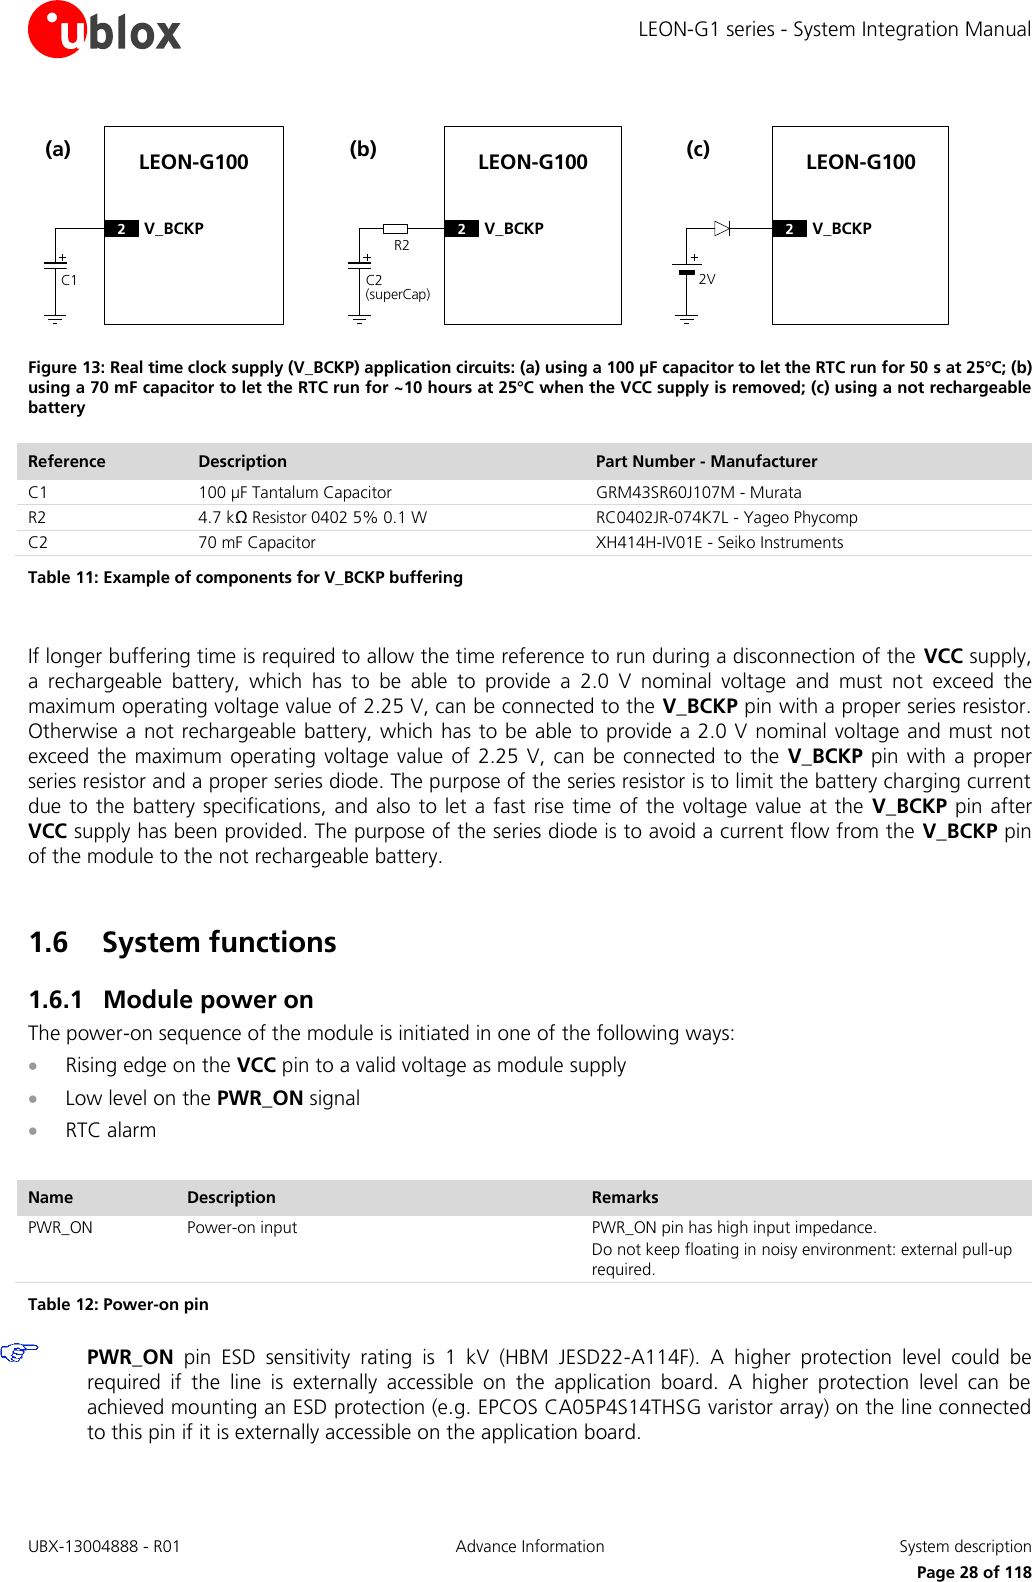 LEON-G1 series - System Integration Manual UBX-13004888 - R01  Advance Information  System description      Page 28 of 118 LEON-G100C1(a)2V_BCKPR2C2(superCap)(b)2V_BCKP2V(c)2V_BCKPLEON-G100 LEON-G100 Figure 13: Real time clock supply (V_BCKP) application circuits: (a) using a 100 µF capacitor to let the RTC run for 50 s at 25°C; (b) using a 70 mF capacitor to let the RTC run for ~10 hours at 25°C when the VCC supply is removed; (c) using a not rechargeable battery Reference Description Part Number - Manufacturer C1 100 µF Tantalum Capacitor GRM43SR60J107M - Murata R2 4.7 kΩ Resistor 0402 5% 0.1 W  RC0402JR-074K7L - Yageo Phycomp C2 70 mF Capacitor  XH414H-IV01E - Seiko Instruments Table 11: Example of components for V_BCKP buffering  If longer buffering time is required to allow the time reference to run during a disconnection of the VCC supply, a  rechargeable  battery,  which  has  to  be  able  to  provide  a  2.0  V  nominal  voltage  and  must  not  exceed  the maximum operating voltage value of 2.25 V, can be connected to the V_BCKP pin with a proper series resistor. Otherwise a not rechargeable battery, which has to be  able to provide a 2.0 V nominal voltage and must not exceed  the maximum operating voltage value of  2.25 V, can be  connected  to the  V_BCKP pin  with a proper series resistor and a proper series diode. The purpose of the series resistor is to limit the battery charging current due to the battery specifications, and also to  let a fast rise time  of the voltage value at the  V_BCKP pin after VCC supply has been provided. The purpose of the series diode is to avoid a current flow from the V_BCKP pin of the module to the not rechargeable battery.  1.6 System functions 1.6.1 Module power on The power-on sequence of the module is initiated in one of the following ways:  Rising edge on the VCC pin to a valid voltage as module supply  Low level on the PWR_ON signal  RTC alarm  Name Description Remarks PWR_ON Power-on input PWR_ON pin has high input impedance. Do not keep floating in noisy environment: external pull-up required. Table 12: Power-on pin  PWR_ON  pin  ESD  sensitivity  rating  is  1  kV  (HBM  JESD22-A114F).  A  higher  protection  level  could  be required  if  the  line  is  externally  accessible  on  the  application  board.  A  higher  protection  level  can  be achieved mounting an ESD protection (e.g. EPCOS CA05P4S14THSG varistor array) on the line connected to this pin if it is externally accessible on the application board.  